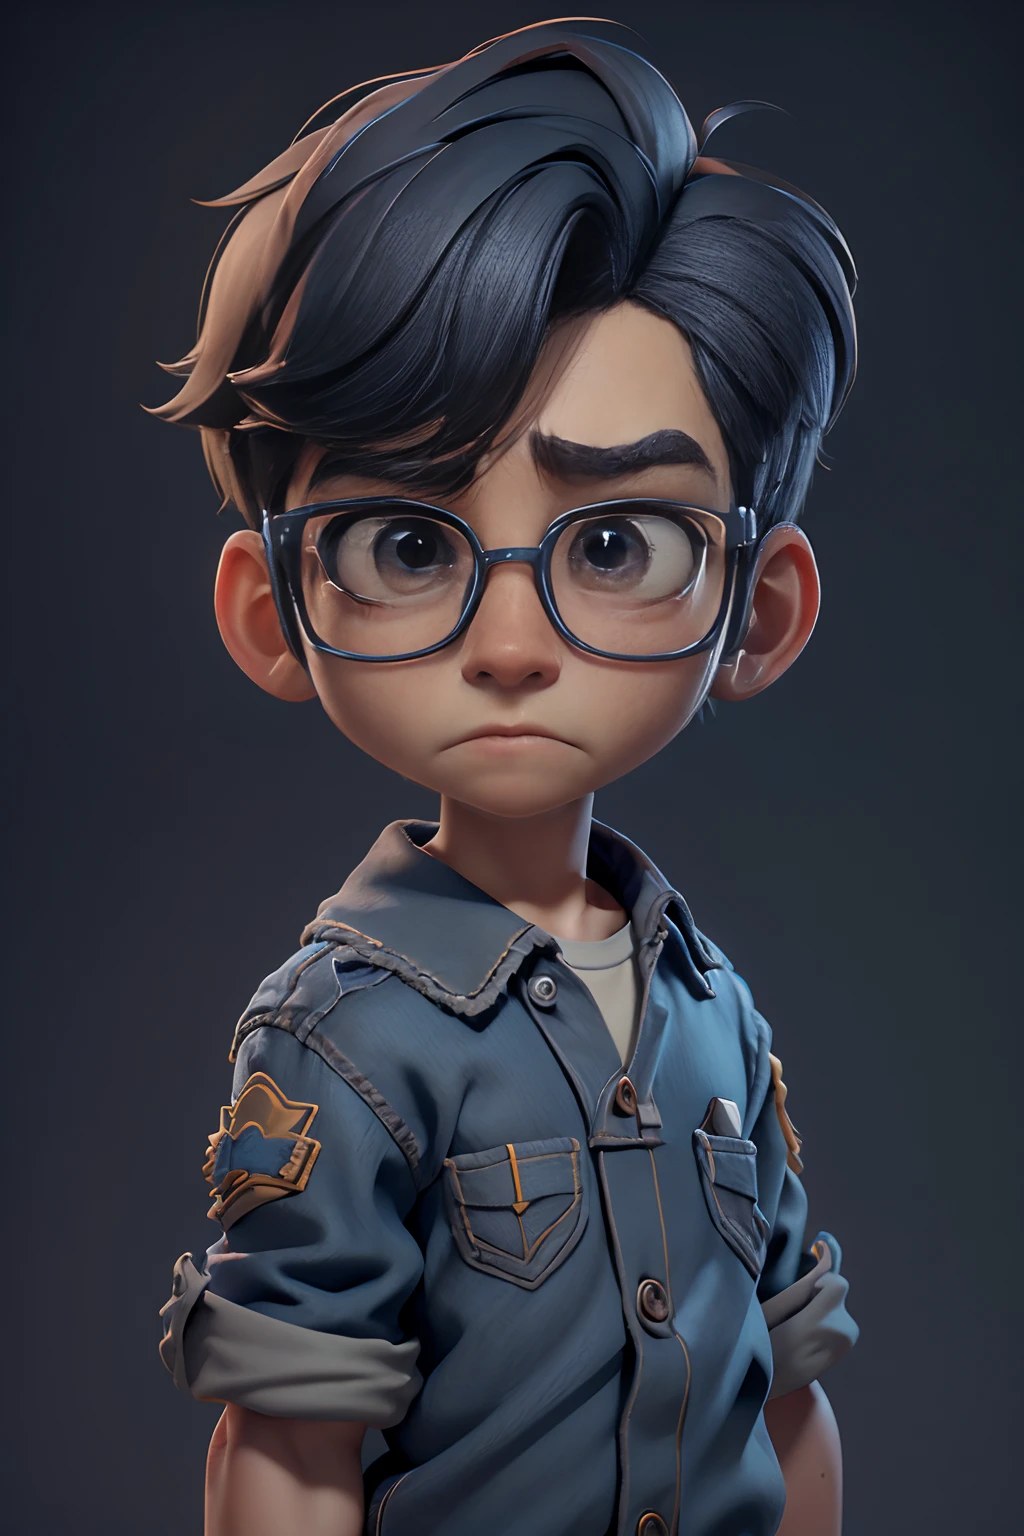 A 3D Pixar style Animation character development, featuring of a young boys nerd look, character spread sheet, blueprint, 3D realistic render, high resolution texture, dramatic lighting, expressive caricature, strong facial expression, dramatic intense perspective